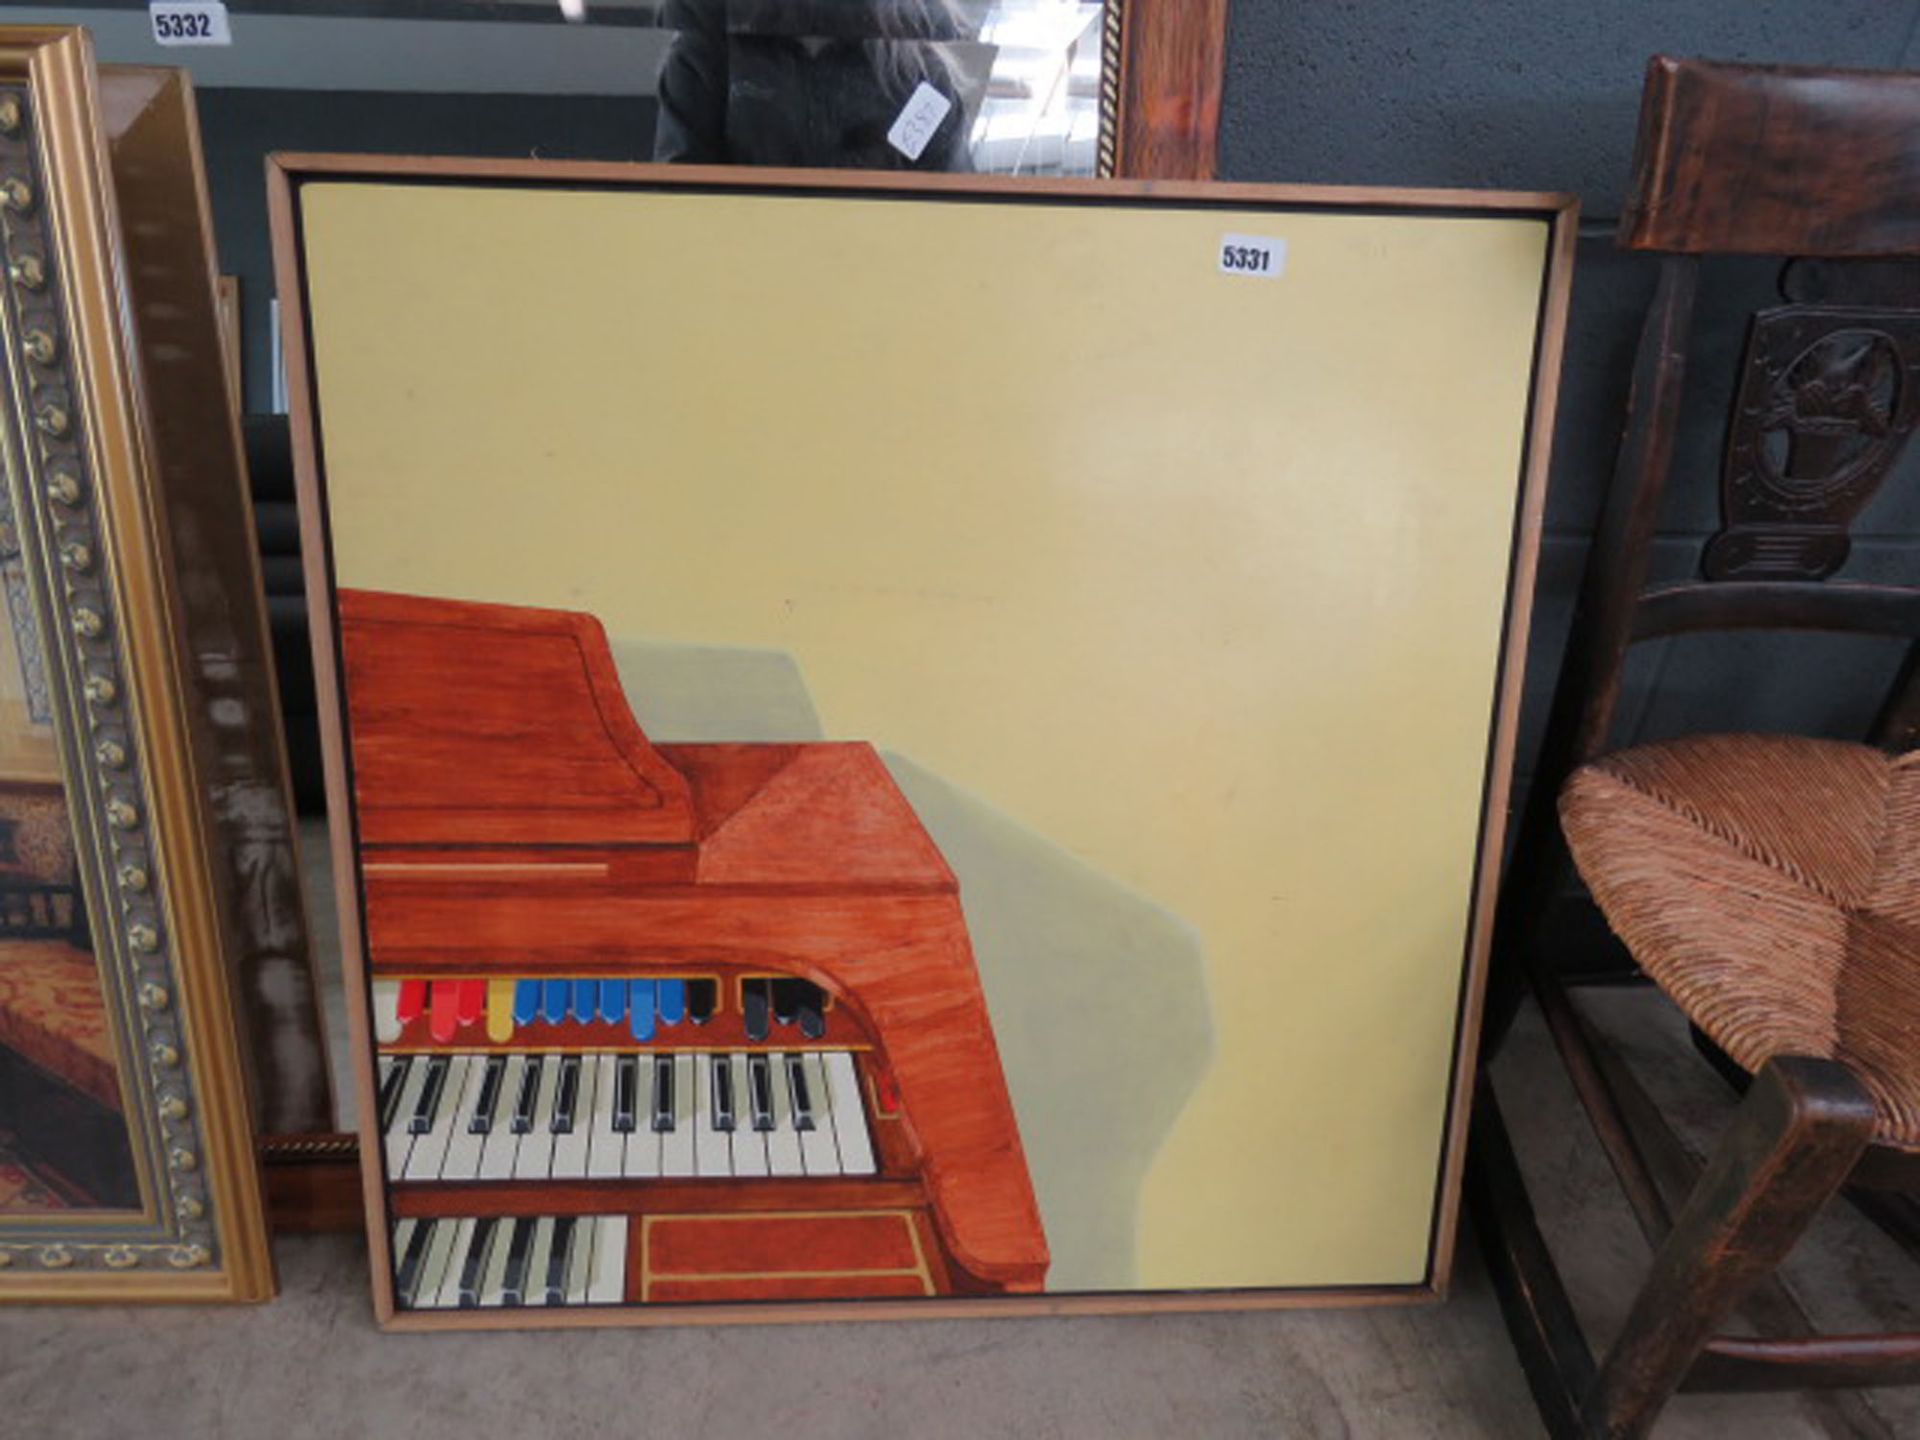 Oil on board - painting of an electric organ